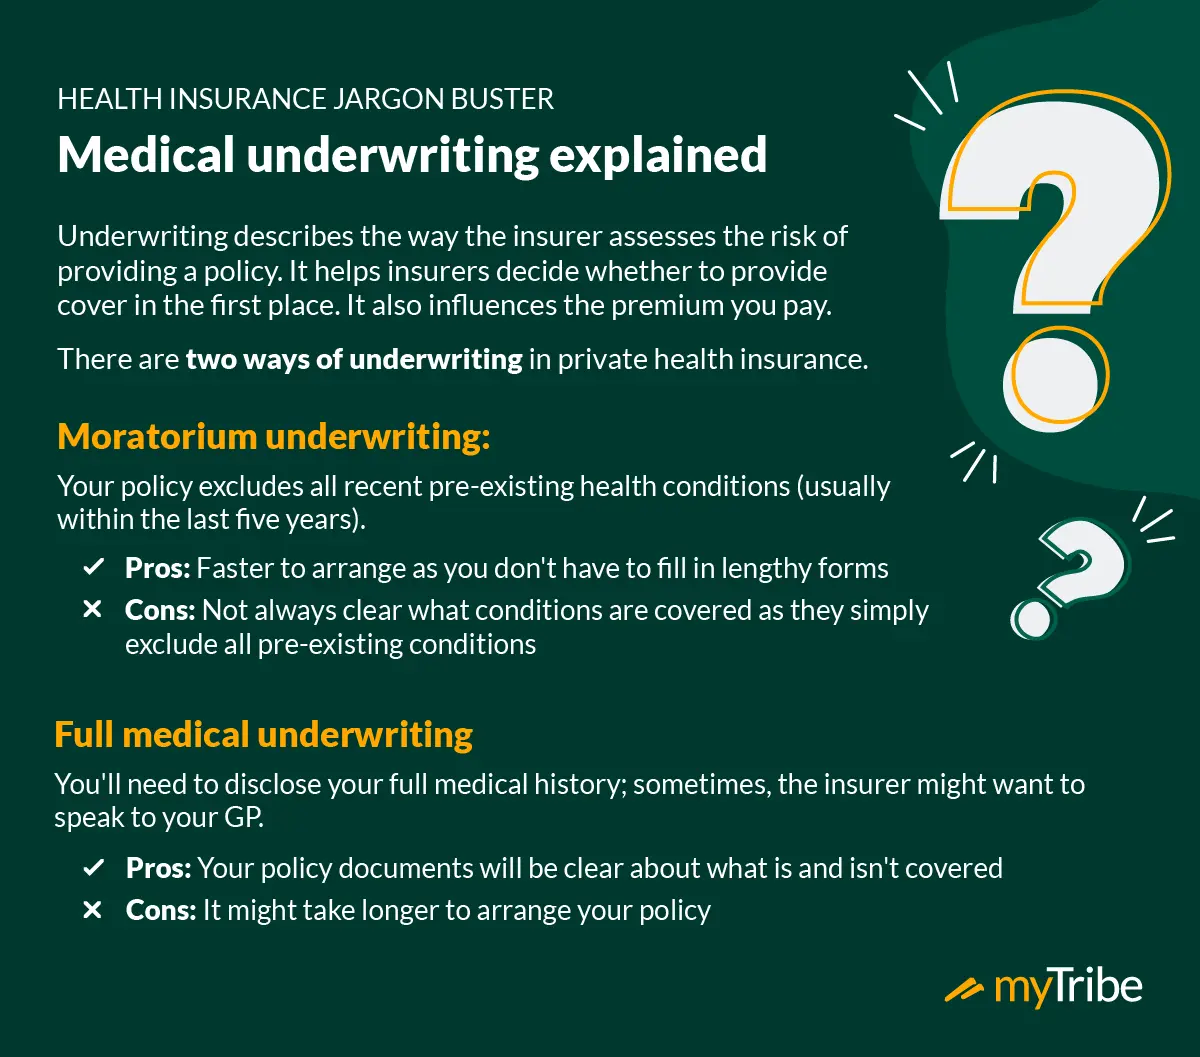 Private Health Insurance Jargon Buster" featuring an explanation of medical underwriting. Text reads: "Medical underwriting explained. Underwriting assesses insurer risk and influences premiums. Two methods: Moratorium (excludes recent pre-existing conditions) and Full medical (requires full medical history disclosure).